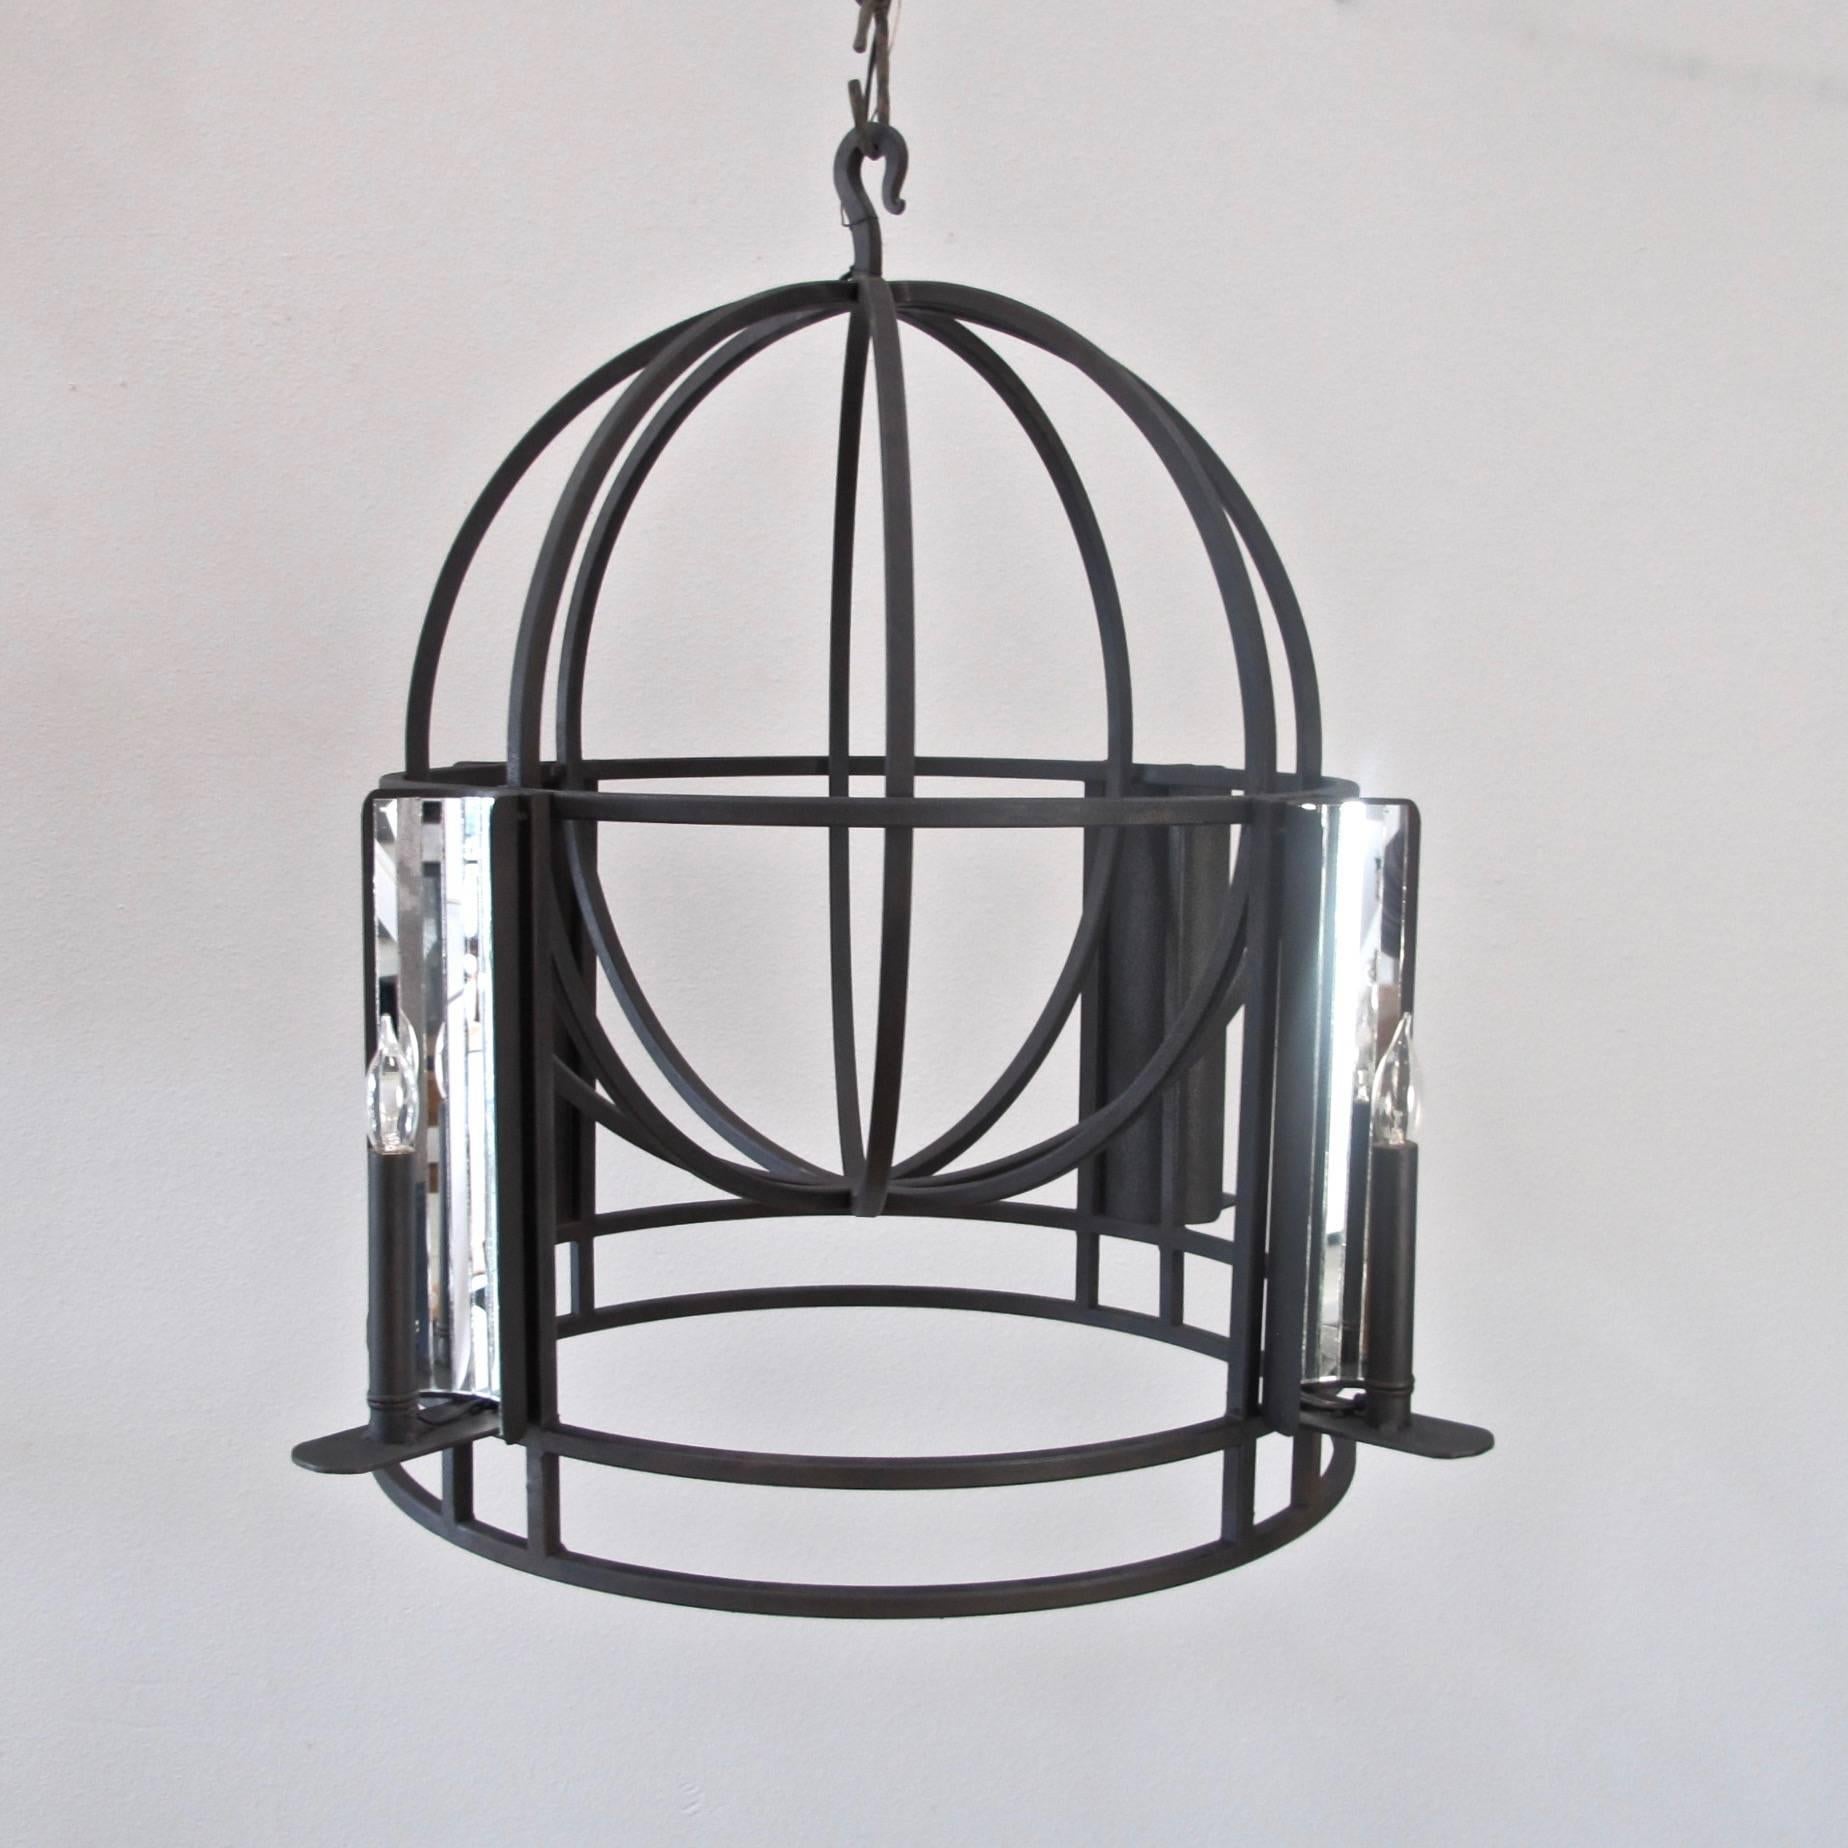 American Mirrored Globe Chandelier For Sale